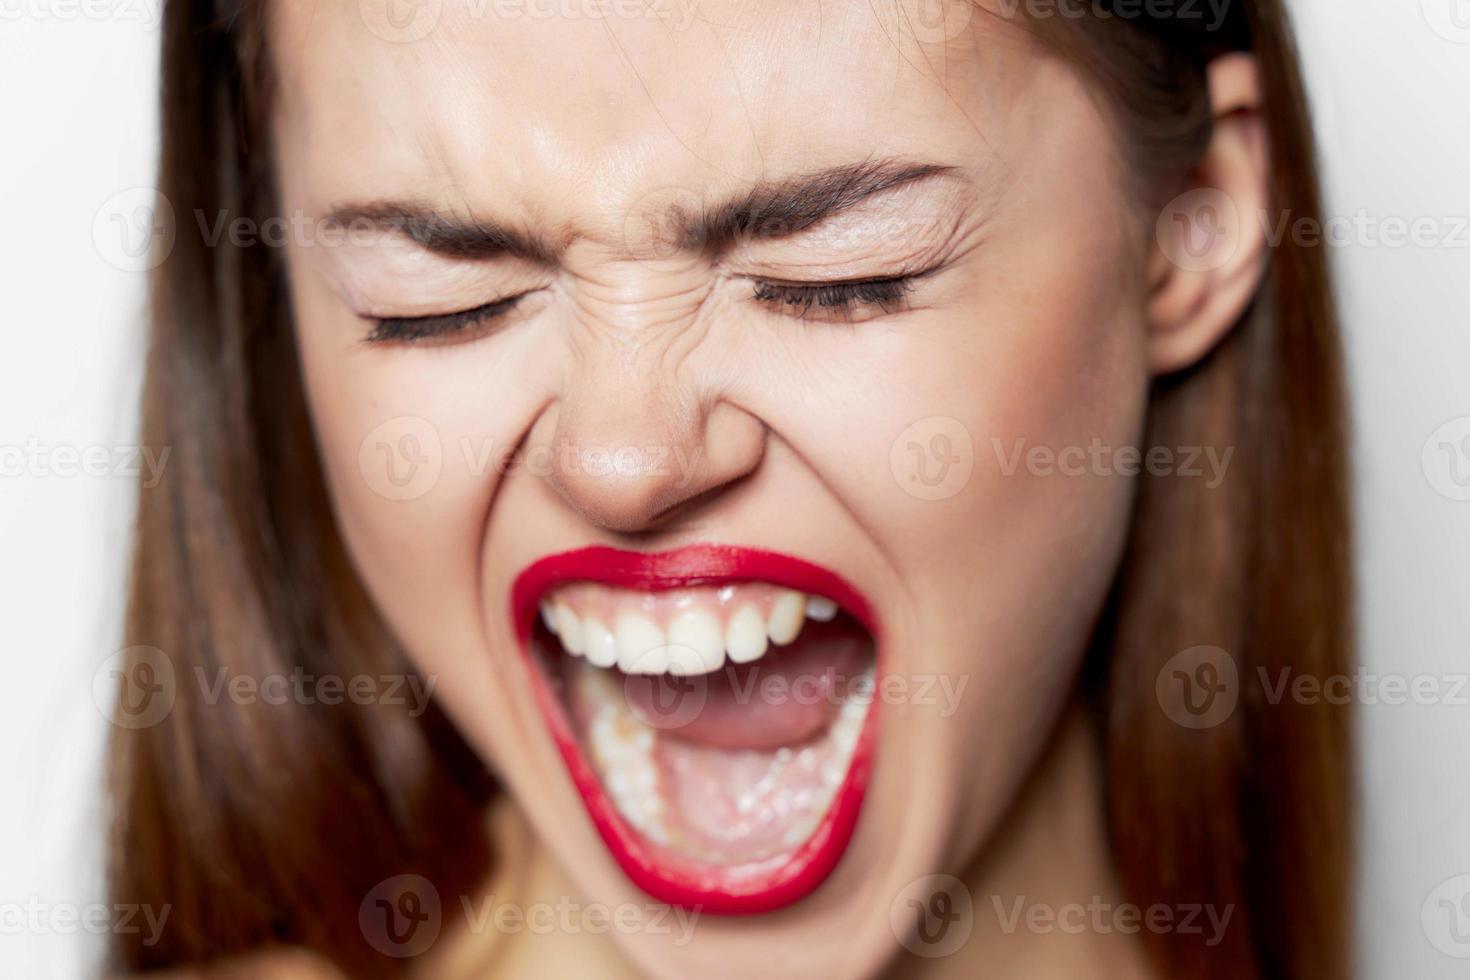 woman with wide open mouth and closed eyes face closeup photo